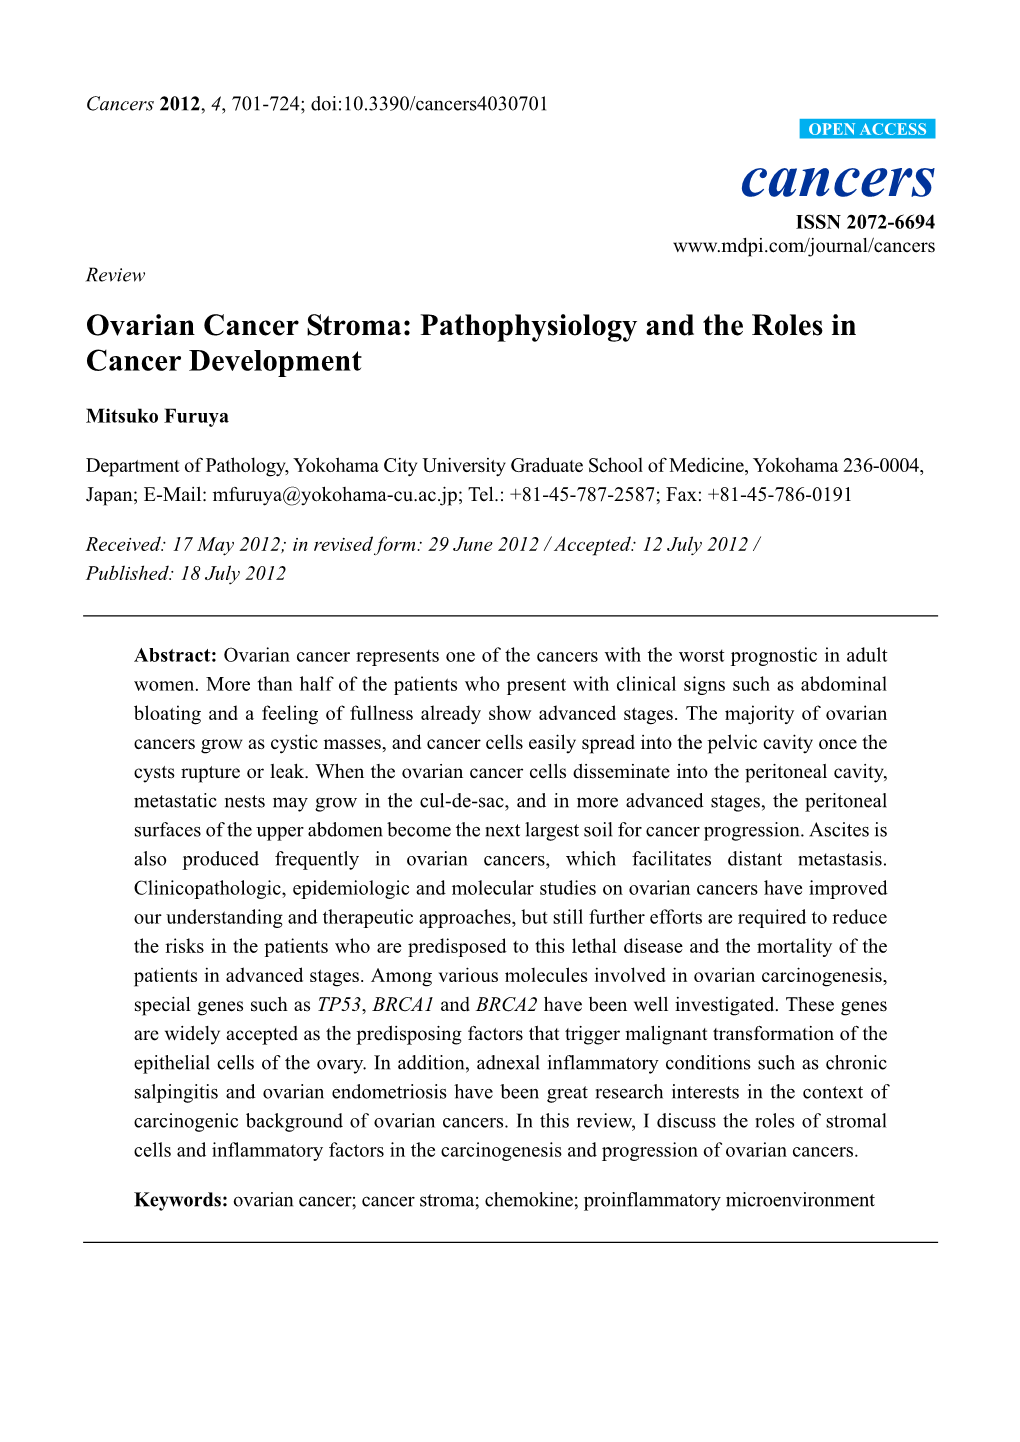 Ovarian Cancer Stroma: Pathophysiology and the Roles in Cancer Development